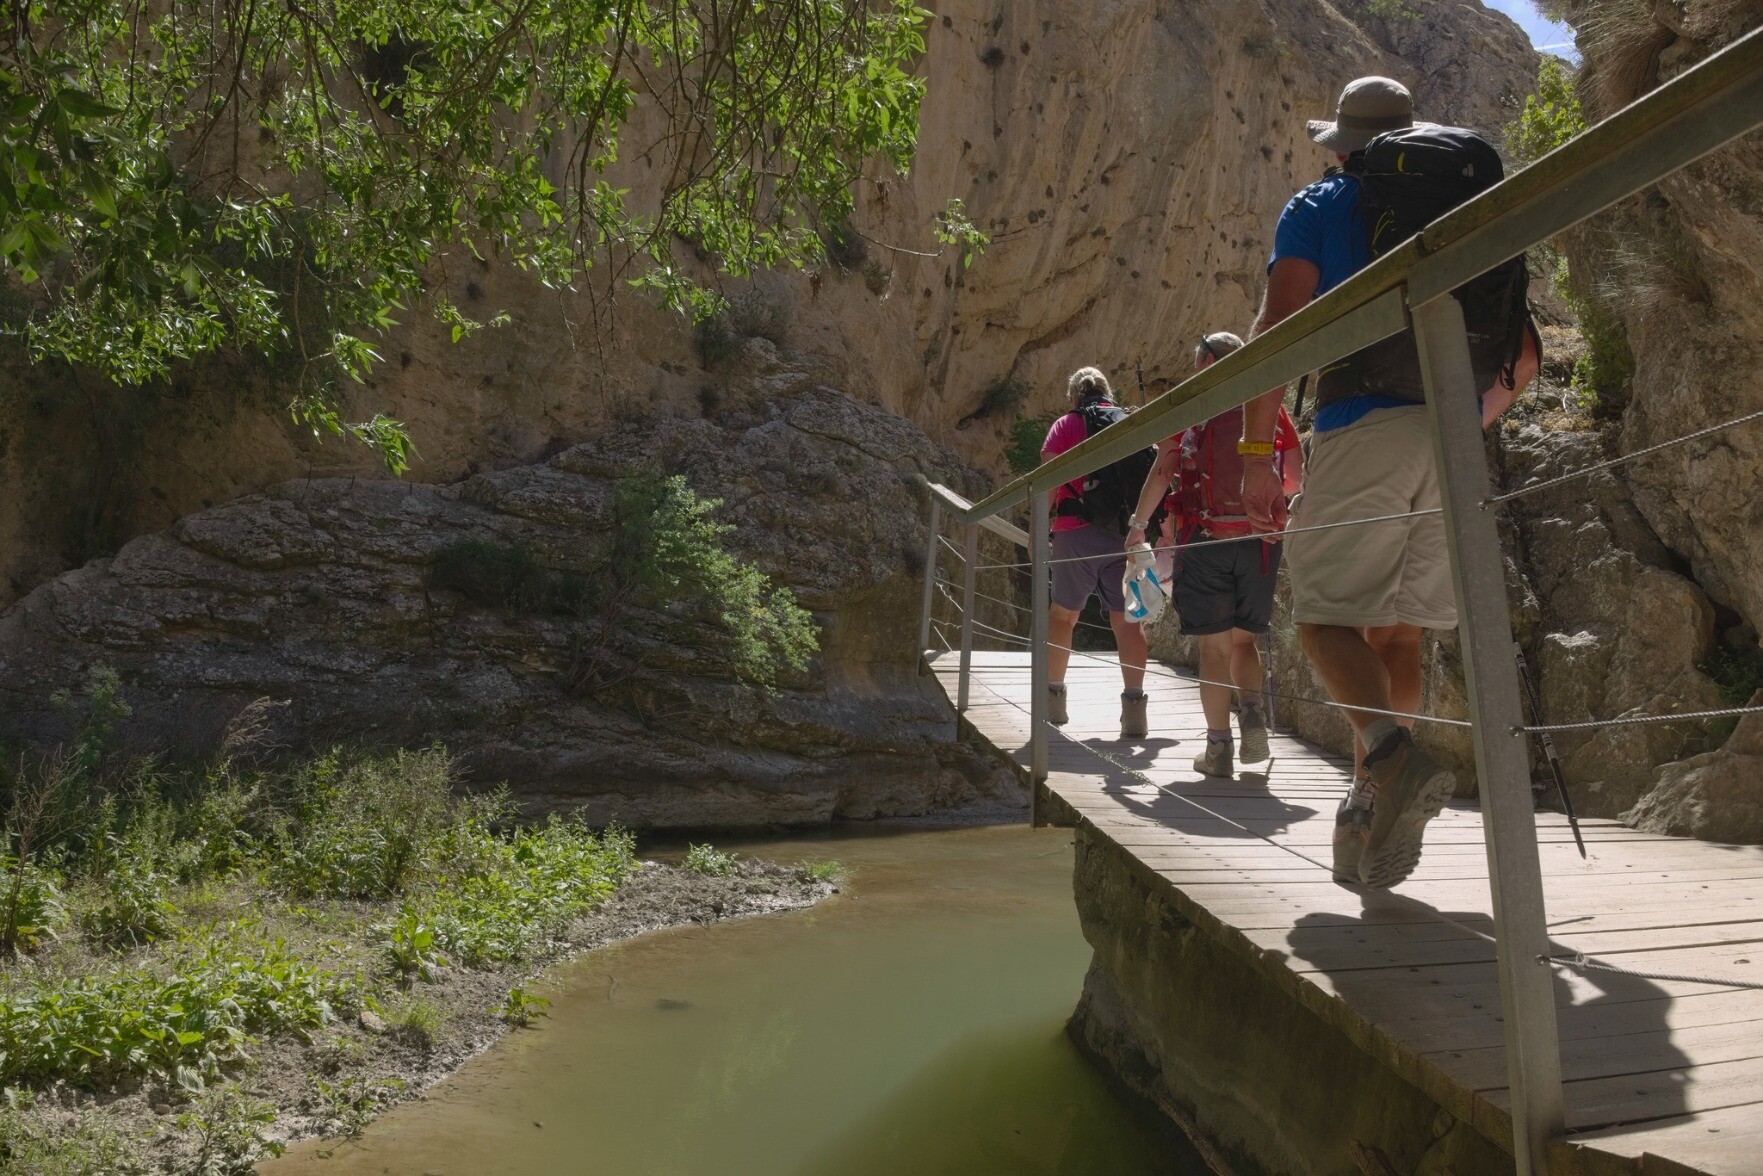 3 hikers cross a exposed walkway above a river with steep sided walls